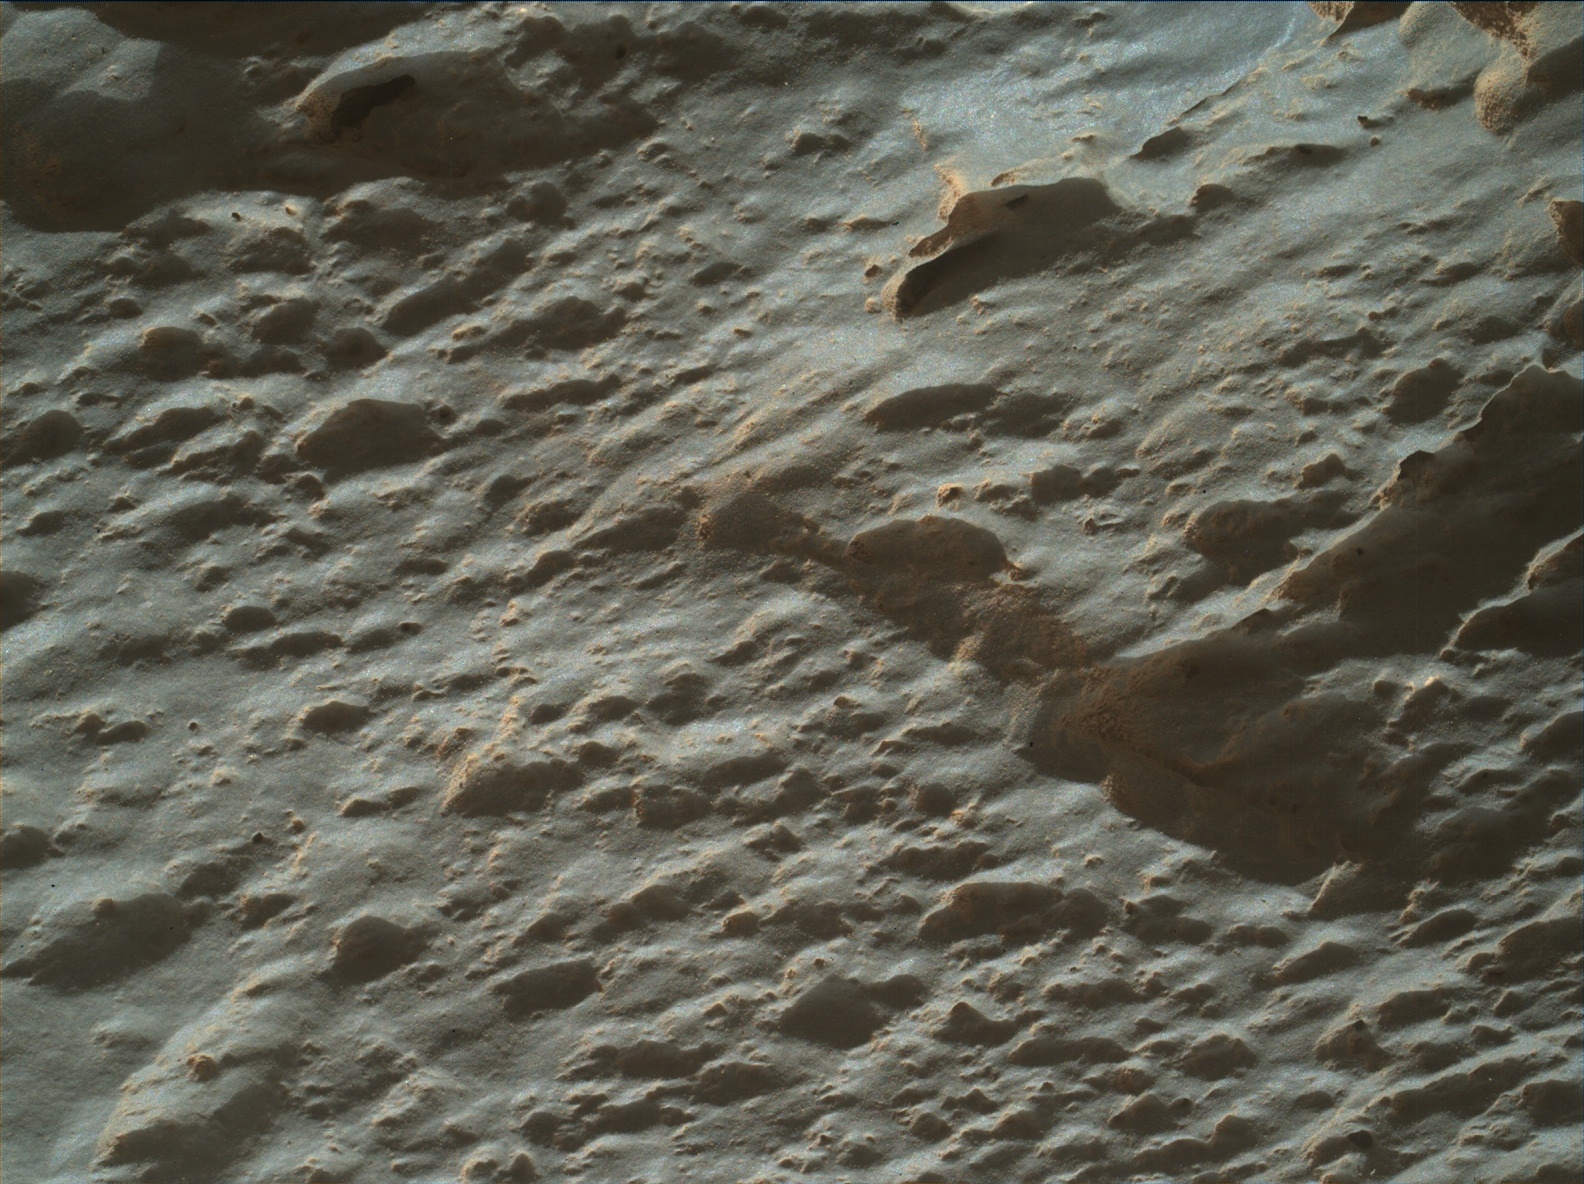 Nasa's Mars rover Curiosity acquired this image using its Mars Hand Lens Imager (MAHLI) on Sol 2643